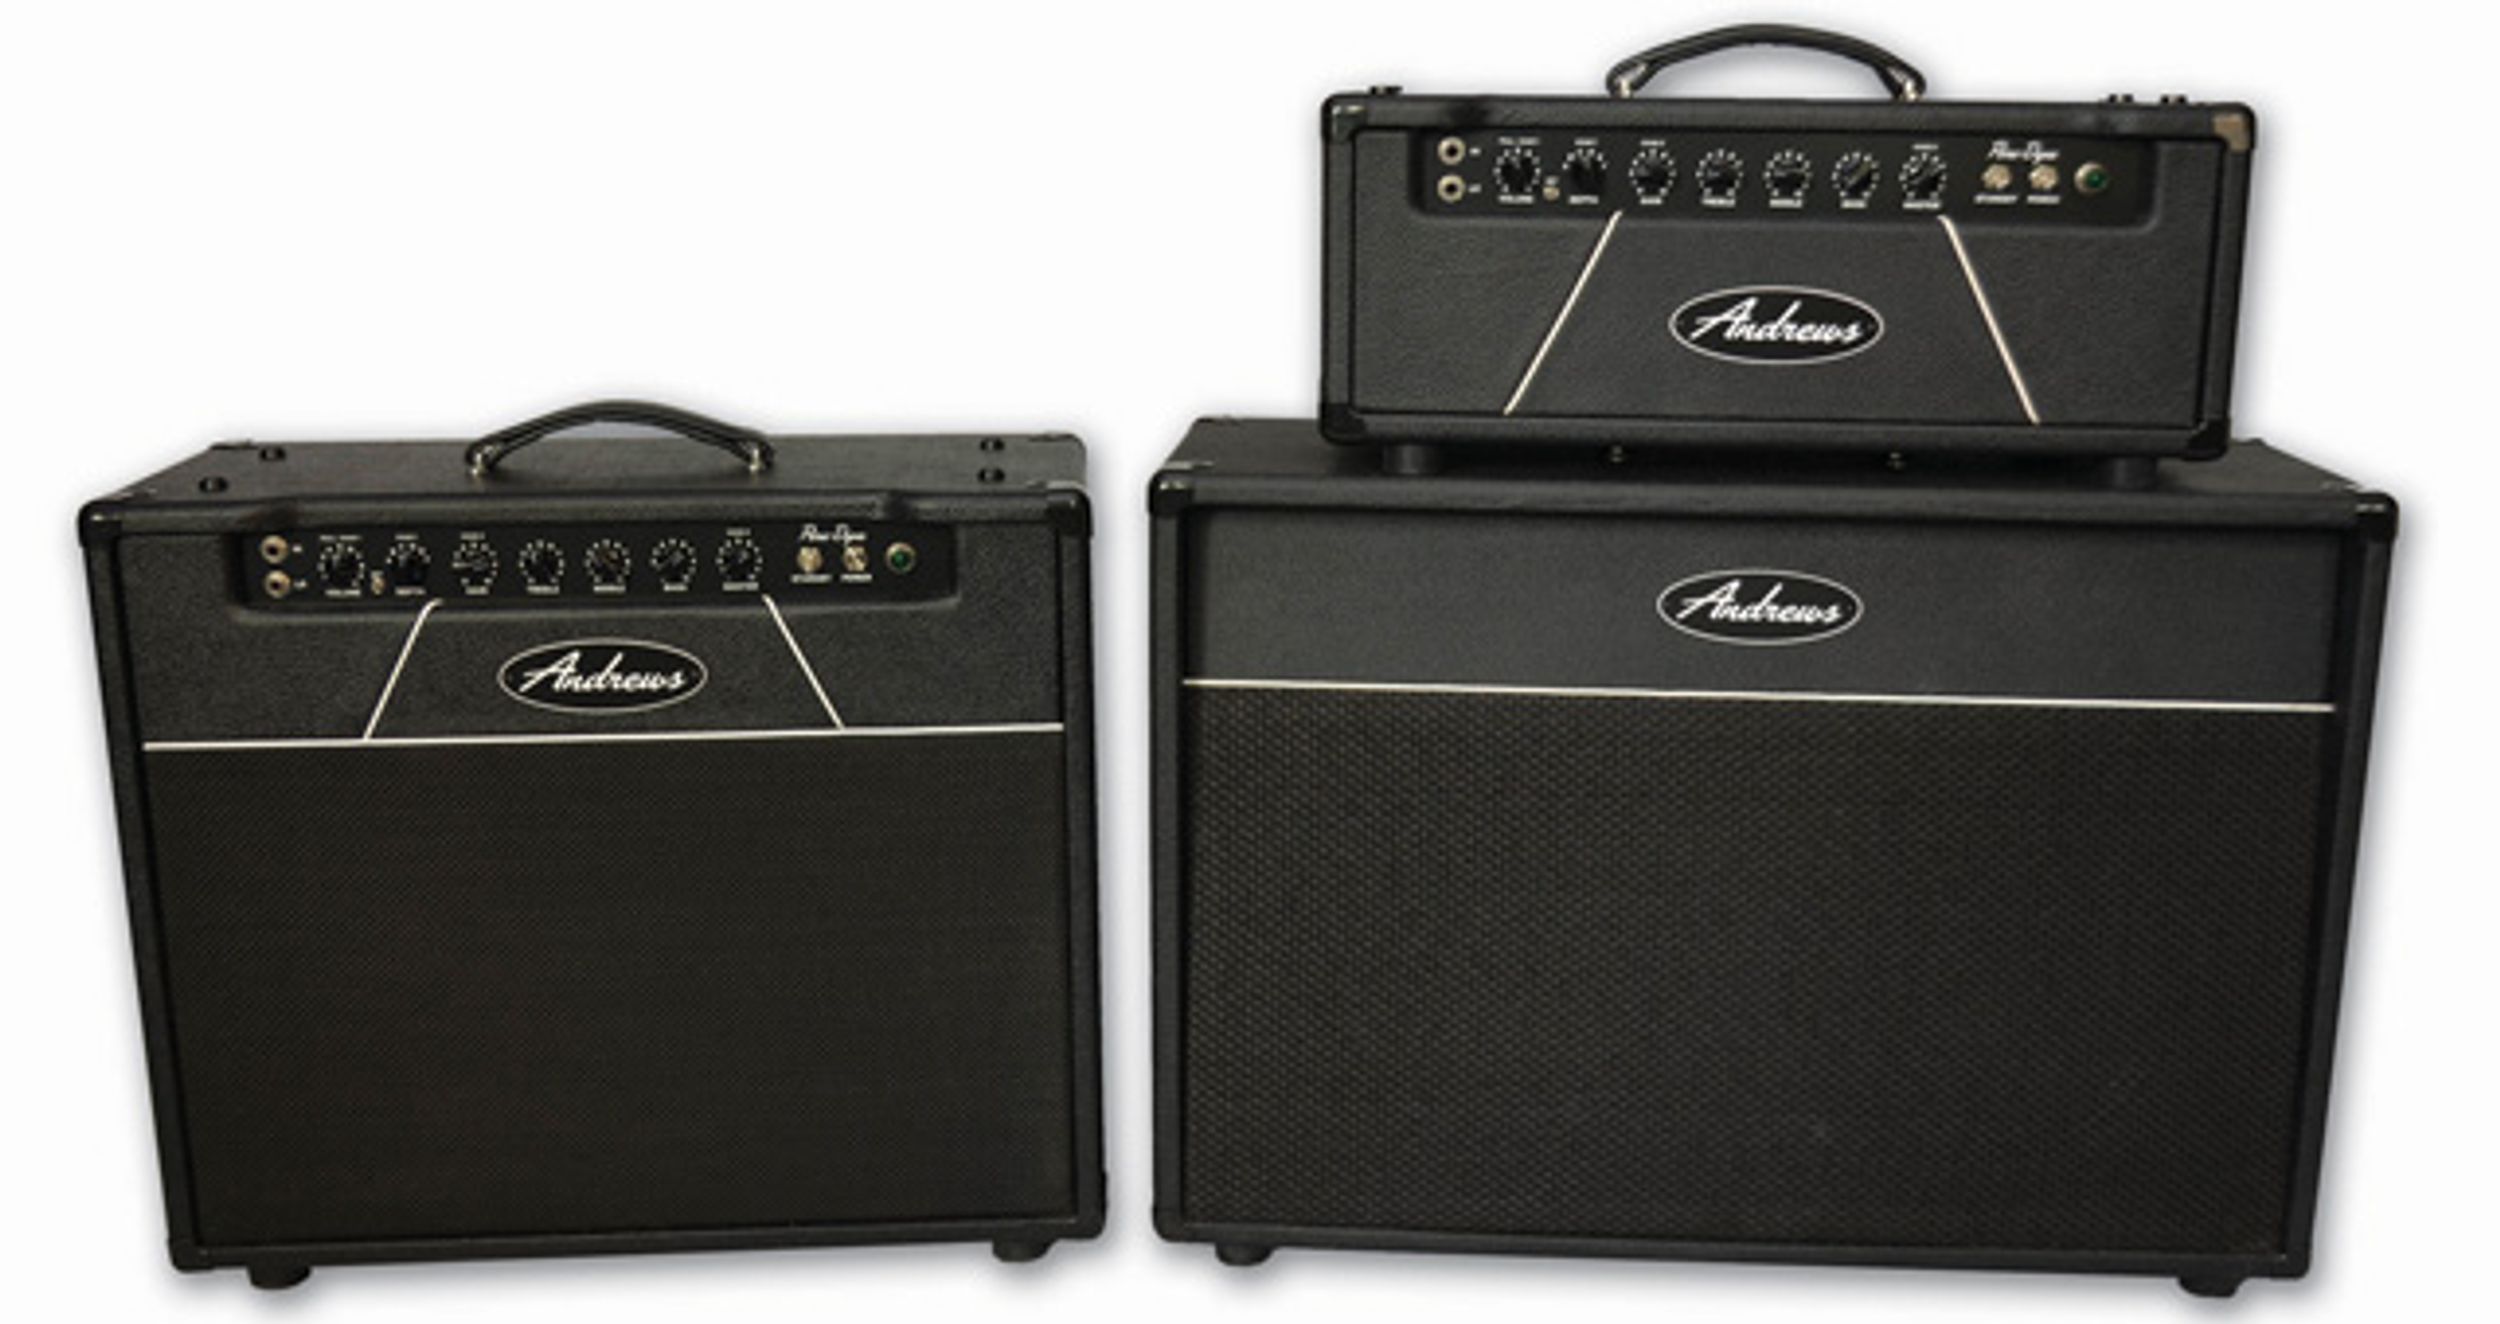 Andrews Amplification Introduces the Para-Dyne Series Amps